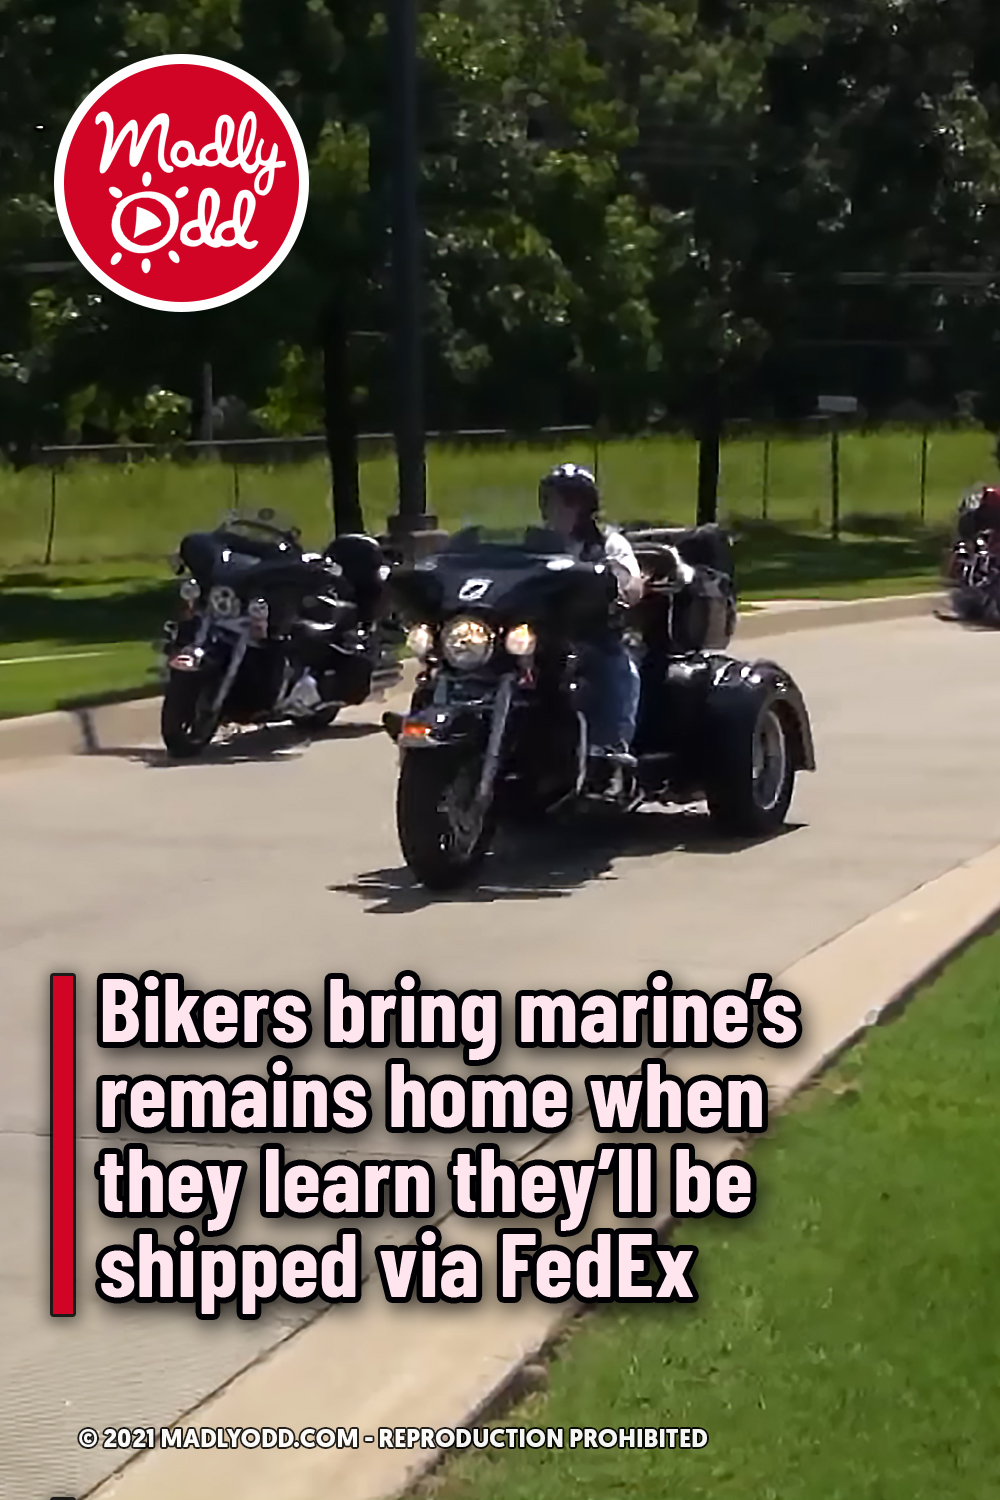 Bikers bring marine’s remains home when they learn they’ll be shipped via FedEx